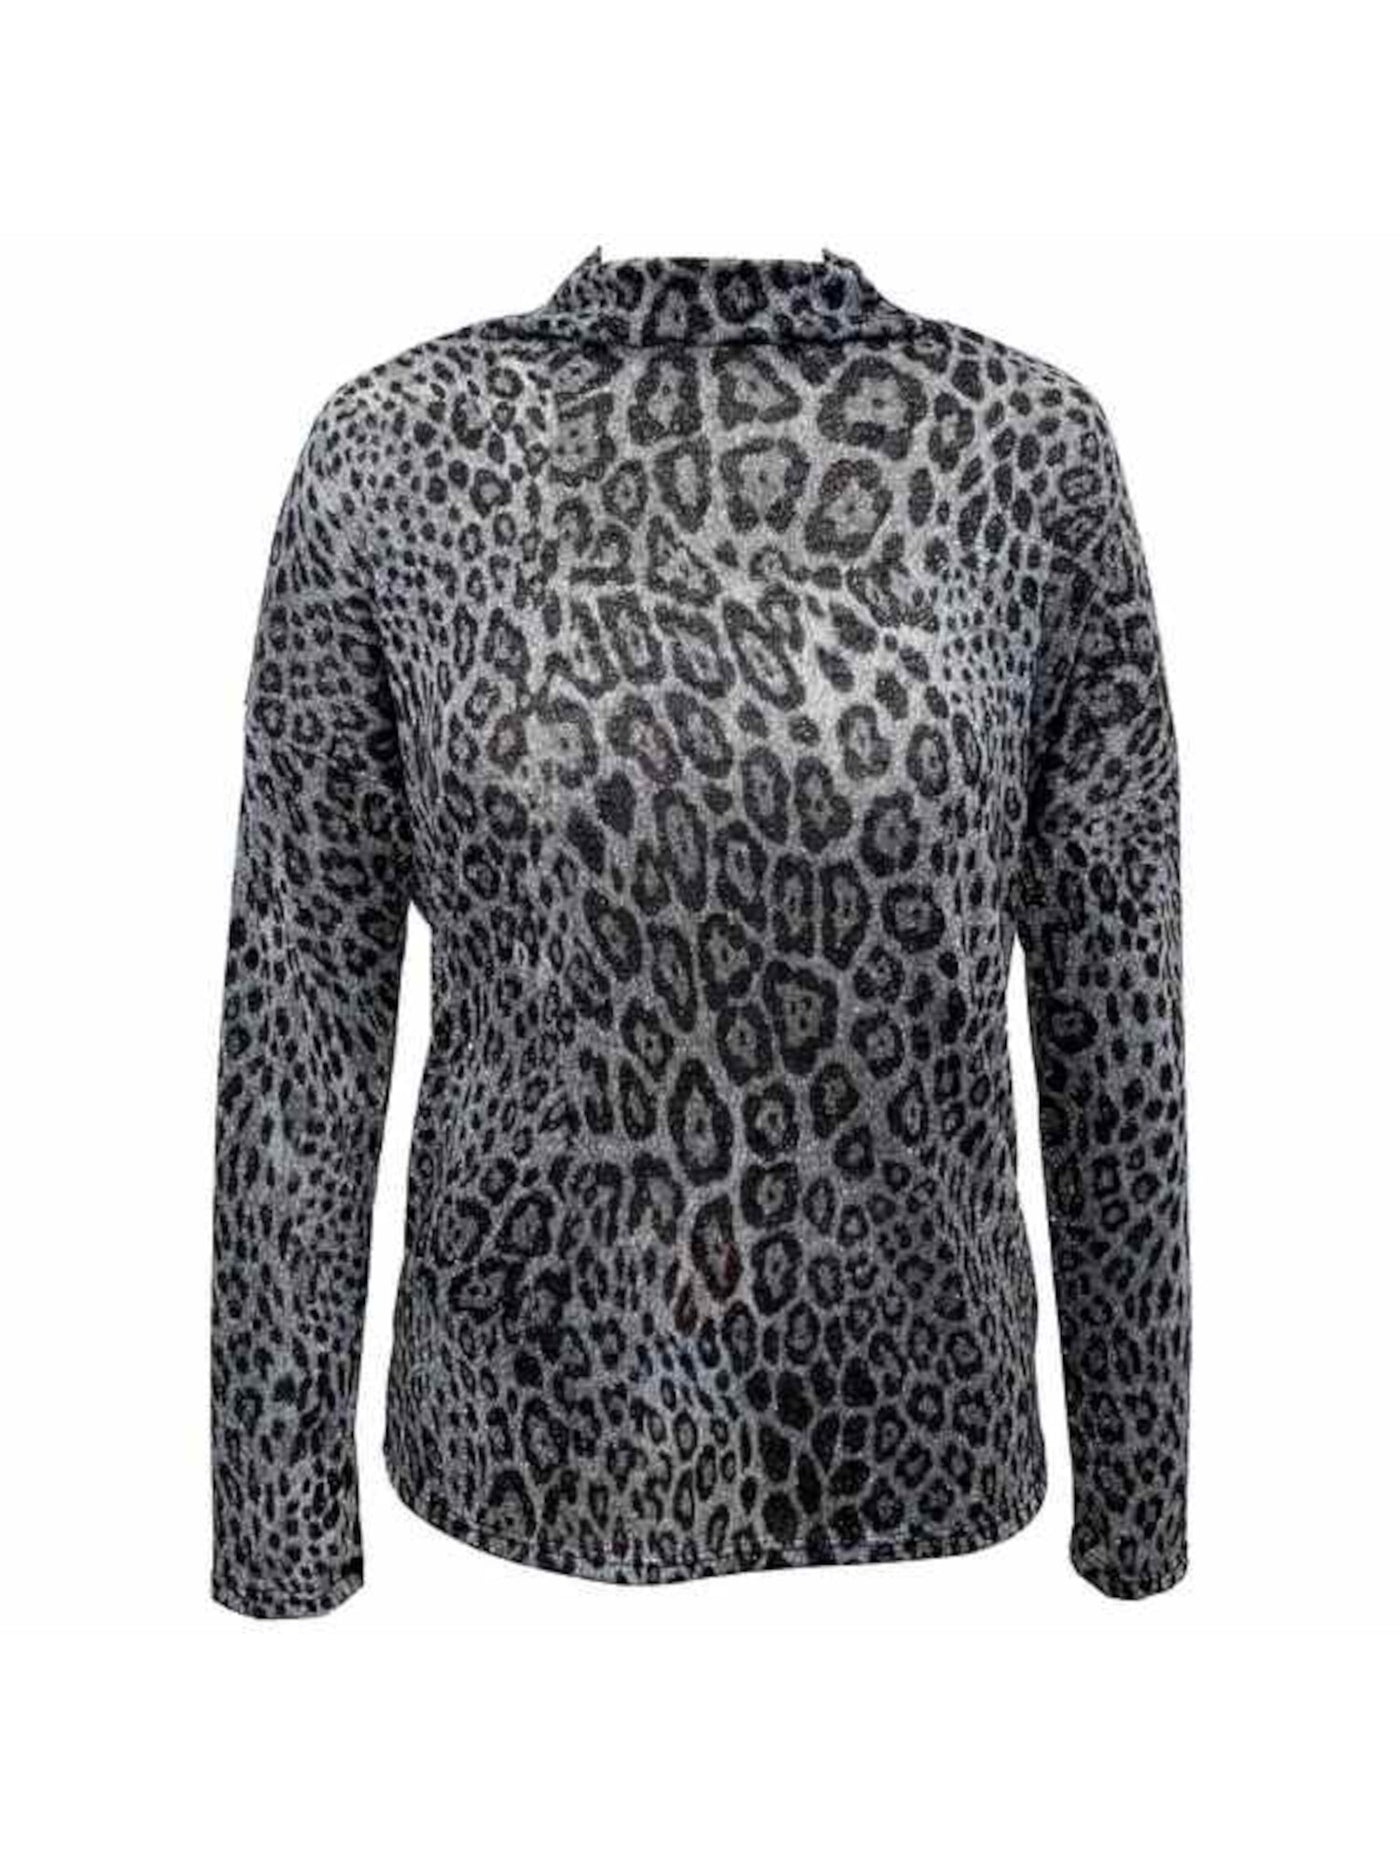 INC Womens Silver Funnel-neck Animal Print Long Sleeve Top Size: S